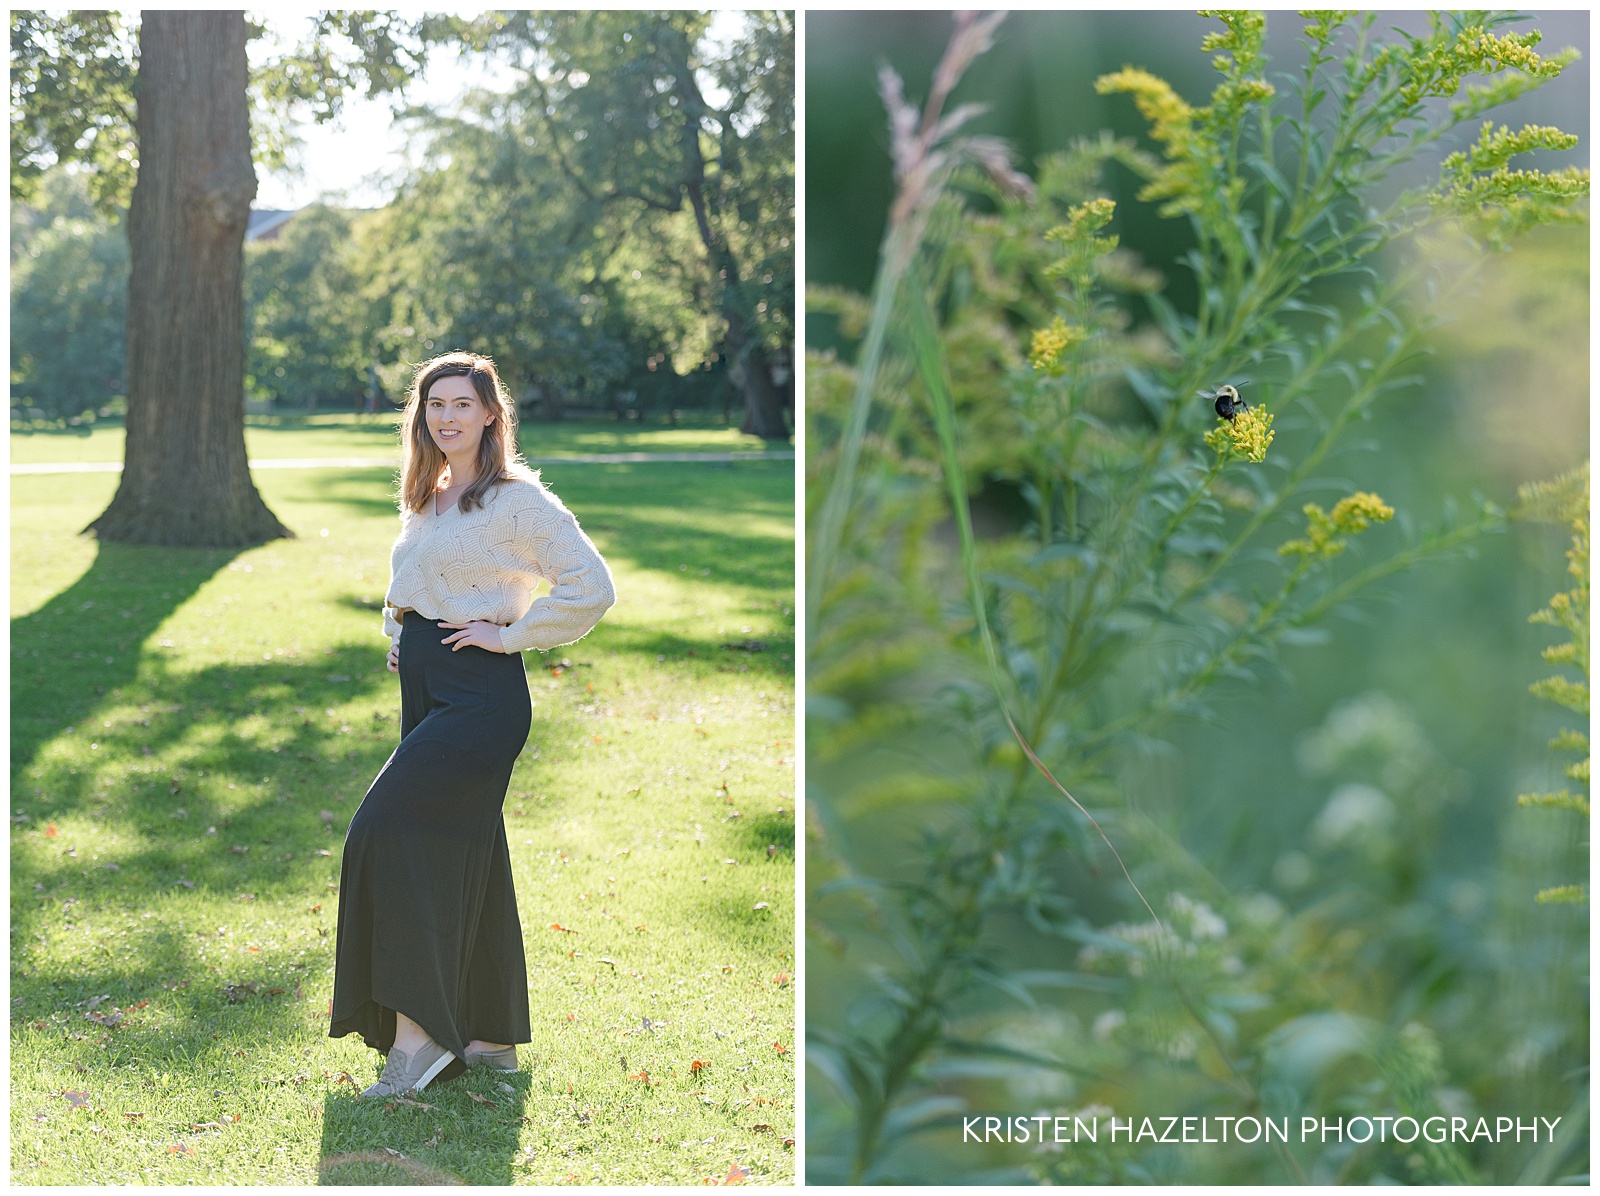 Collage of backlit full body senior portrait and bee in goldenrod flowers